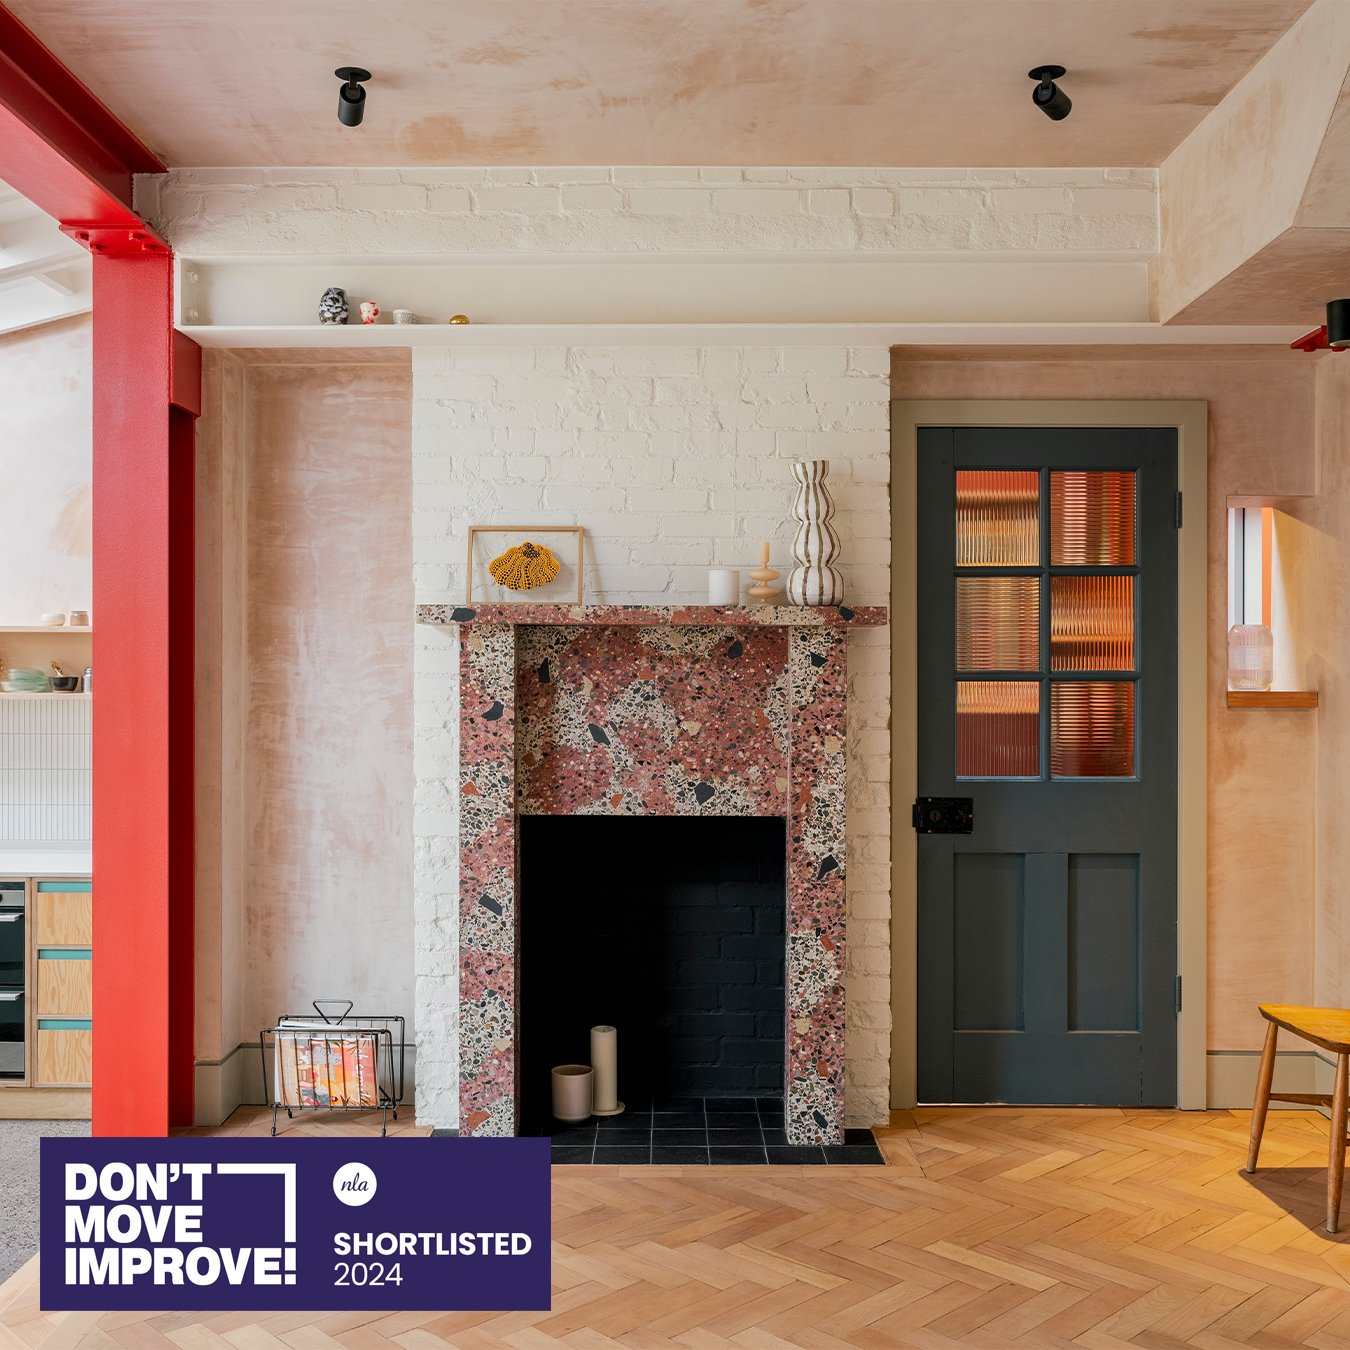 We are so pleased to announce that Hillside House has been shortlisted in the Don't Move, Improve! 2024 awards! The project is a work of many hands: the fantastic eyes for design and colour of our clients @ninamakesclothes and @benjidavies, the skill